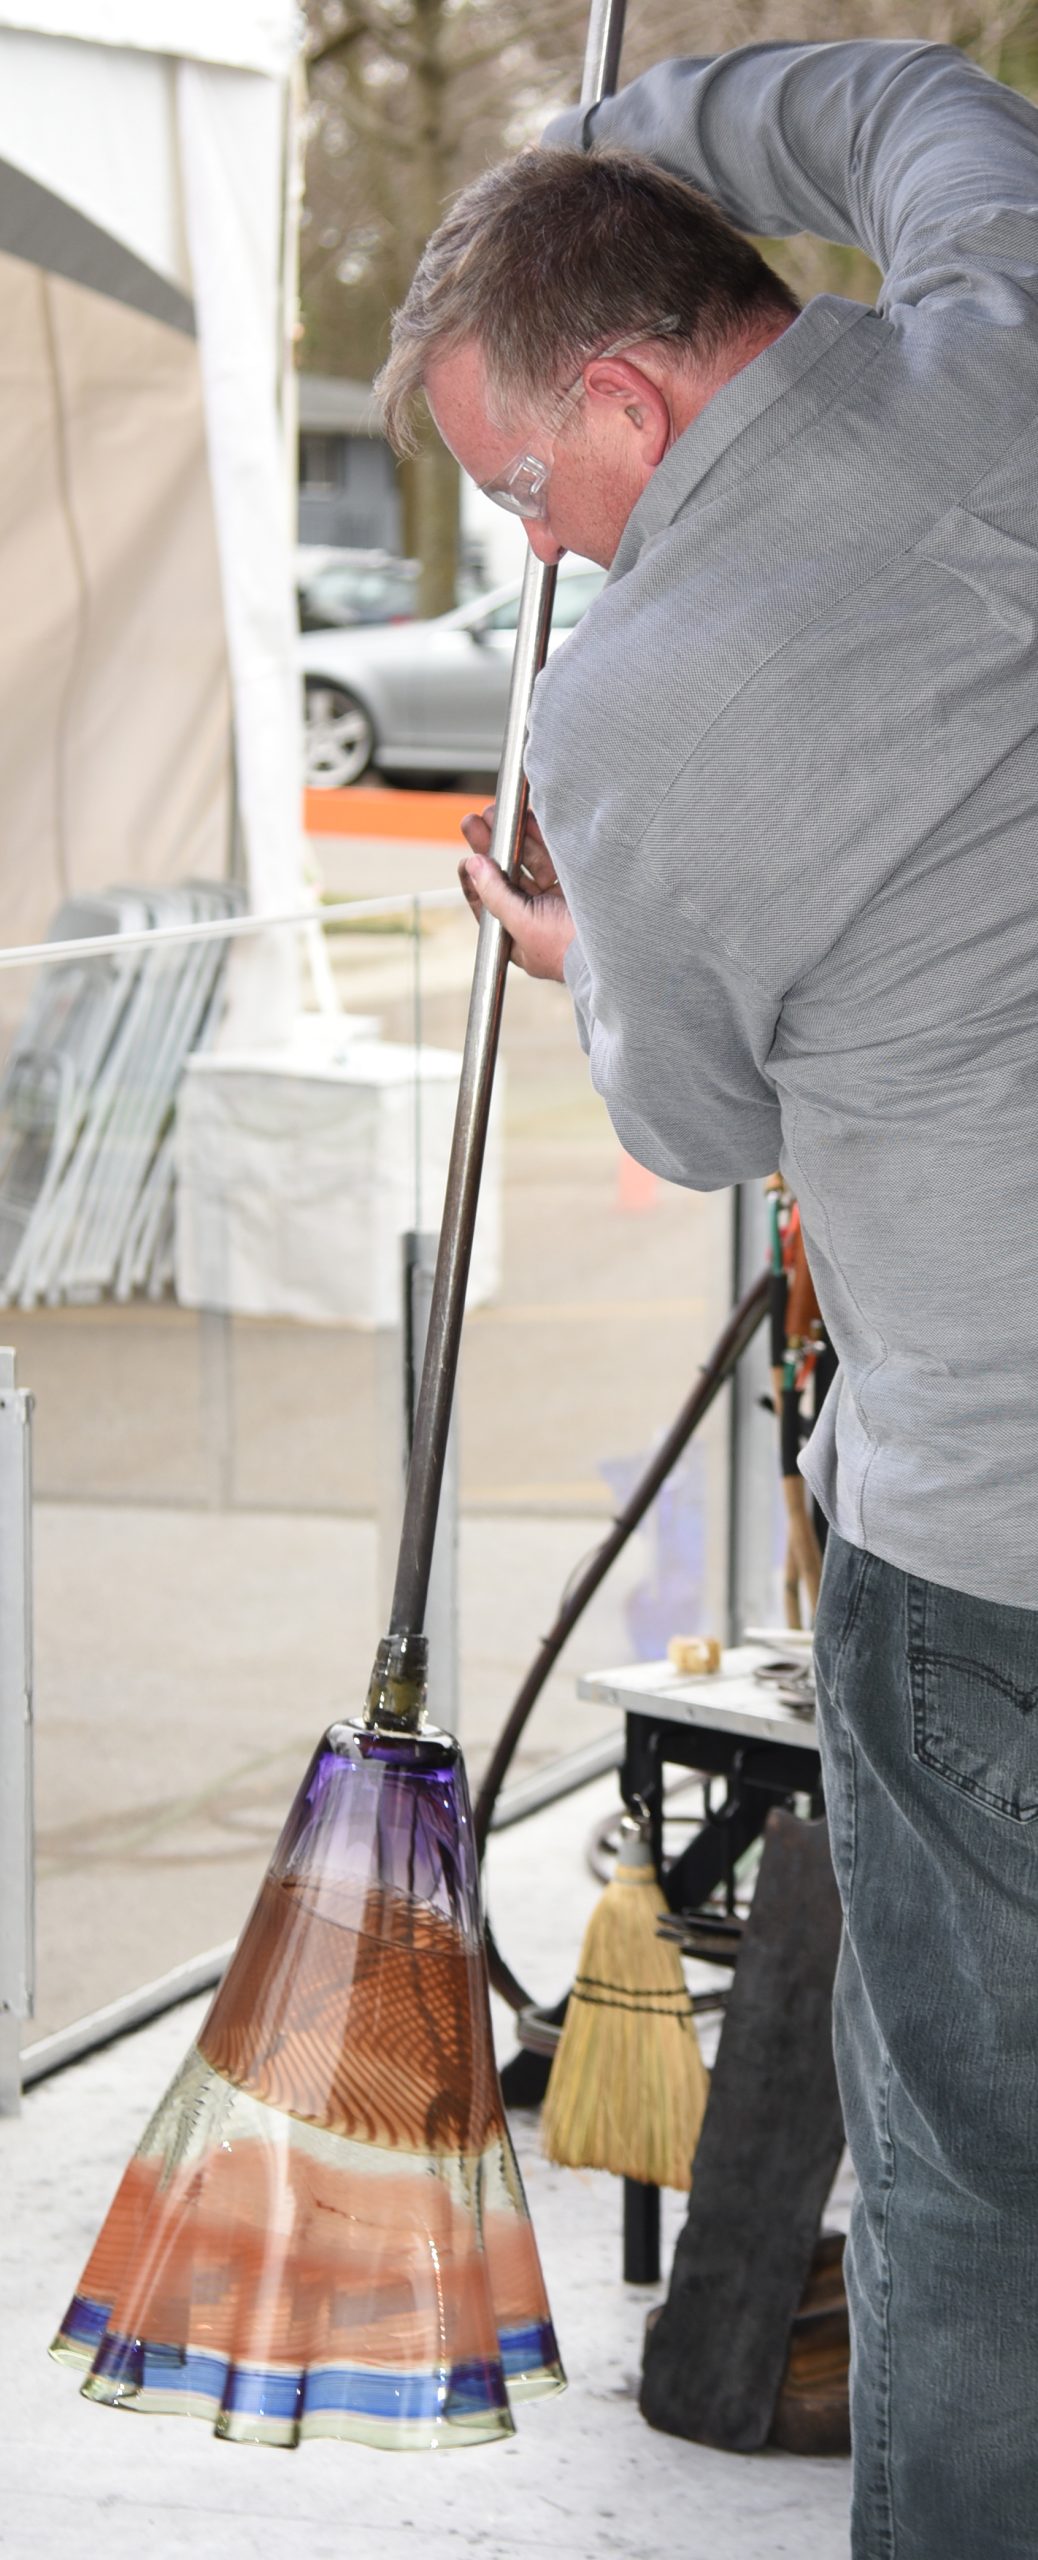 A glassmaker spins a long metal rod that he holds vertically to use gravity to help shape colorfully striped glass while it remains warm and pliable and before it cools and hardens into a large vase.